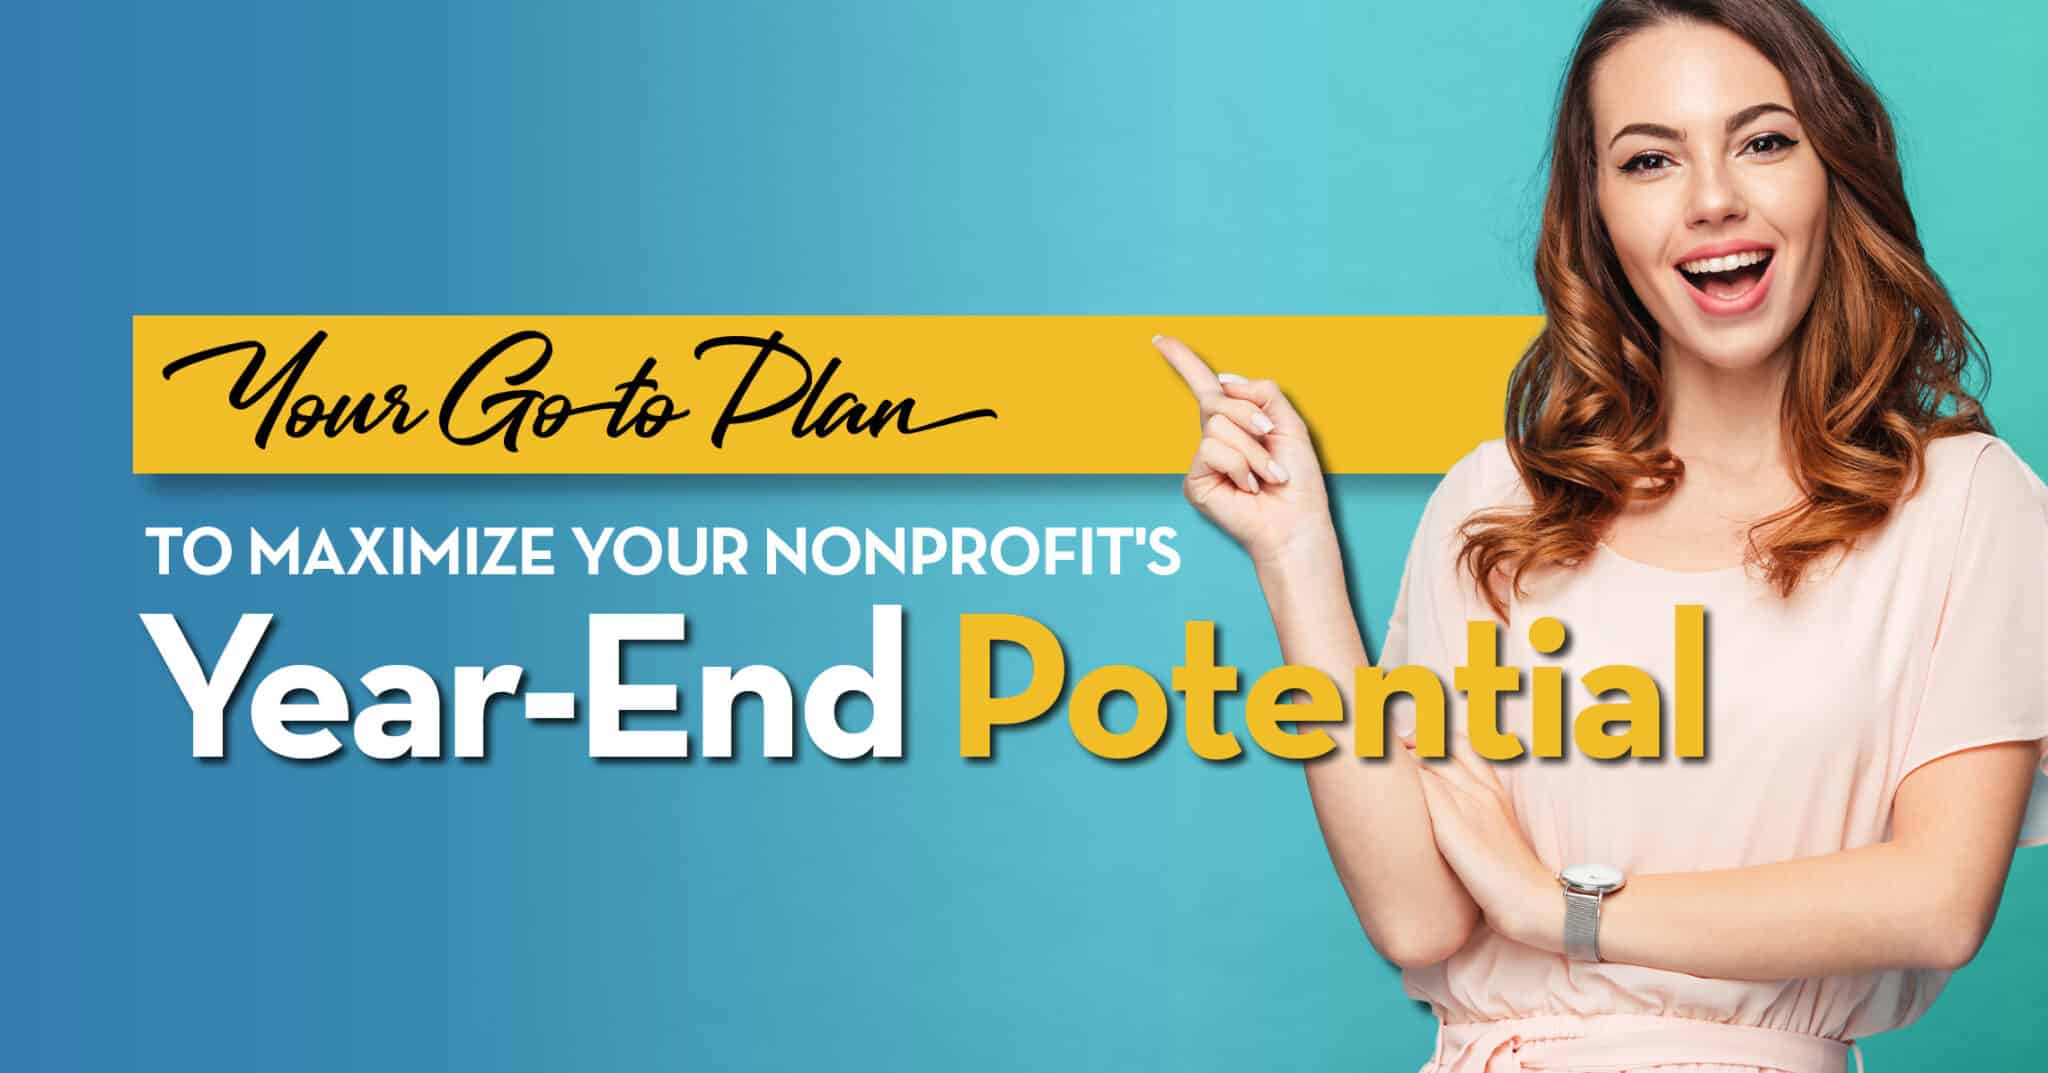 Your Go-to Plan to Maximize Your Nonprofit's Year-End Potential